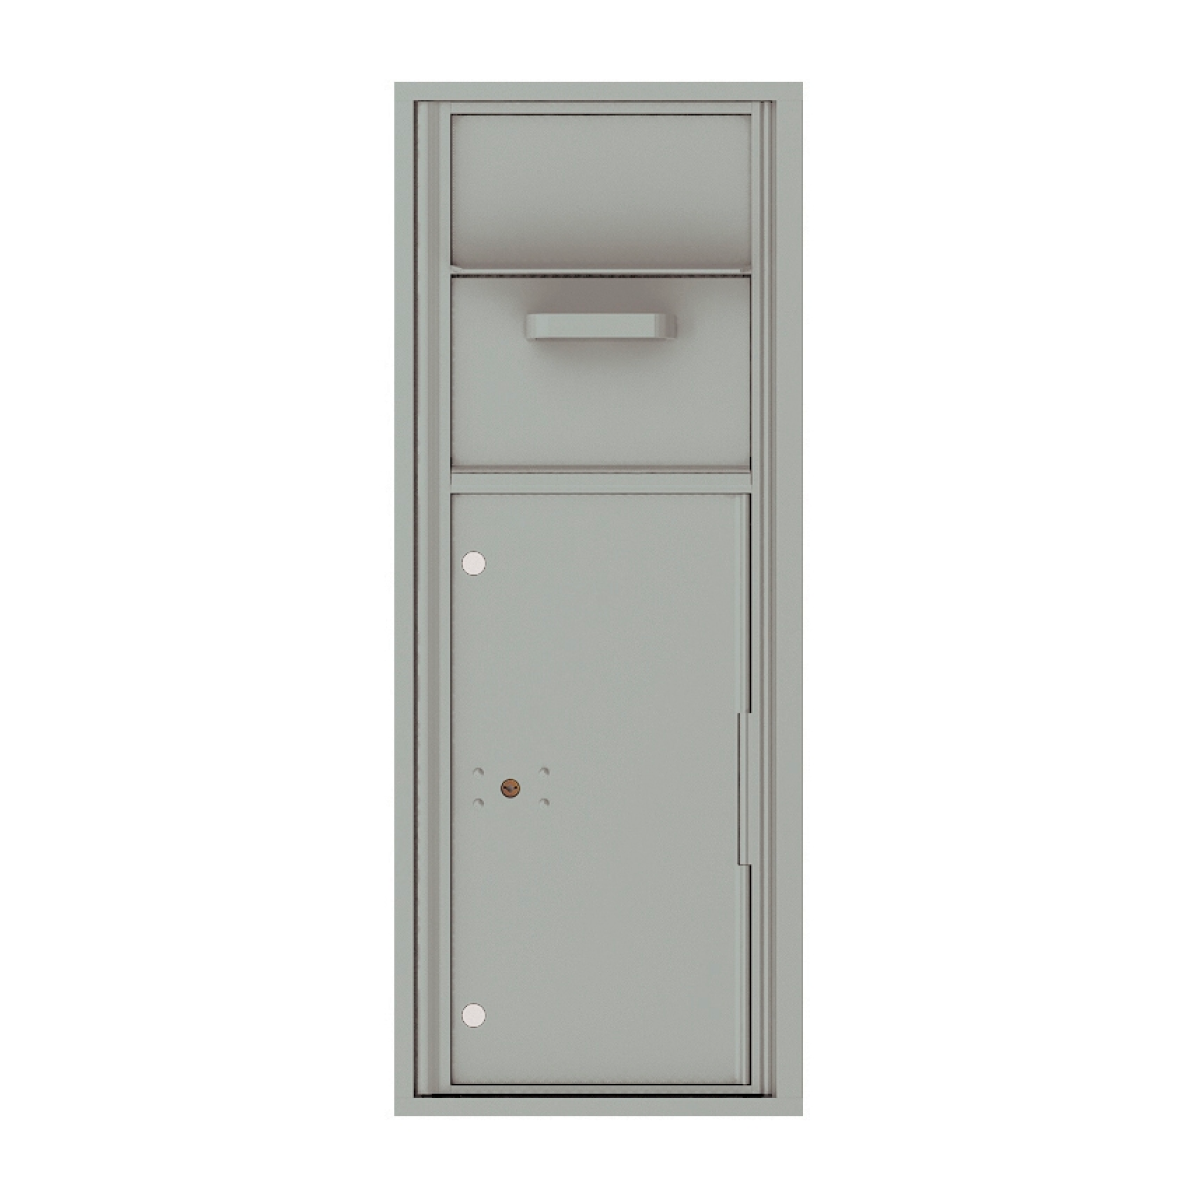 4C Mailboxes 4C12S-HOP Collection and Drop Box Product Image